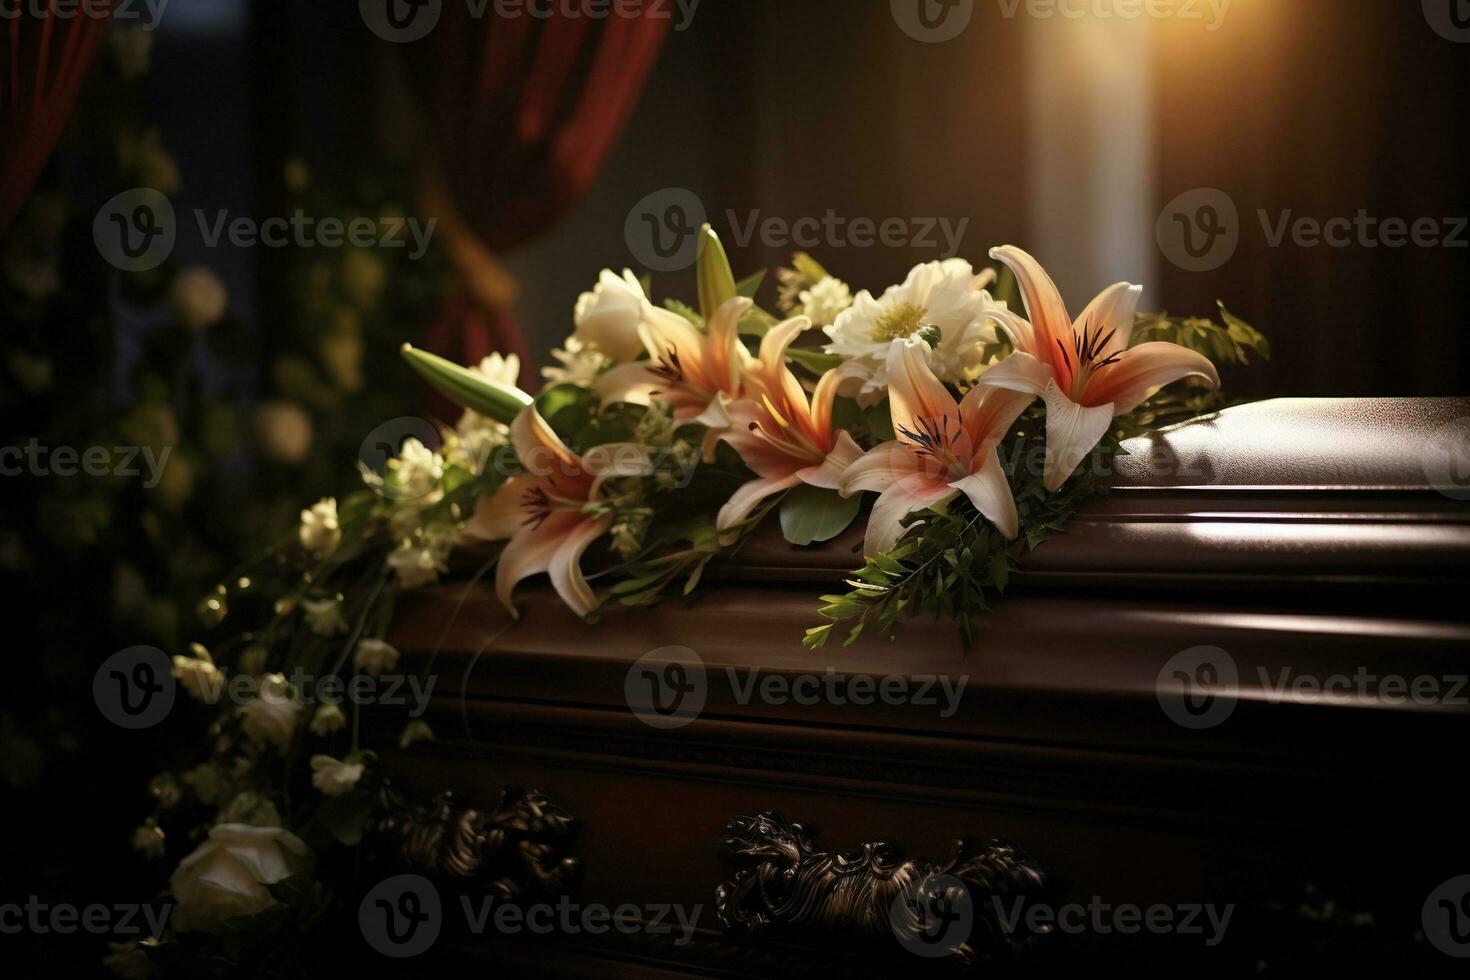 AI generated Funeral casket with flowers on dark background photo